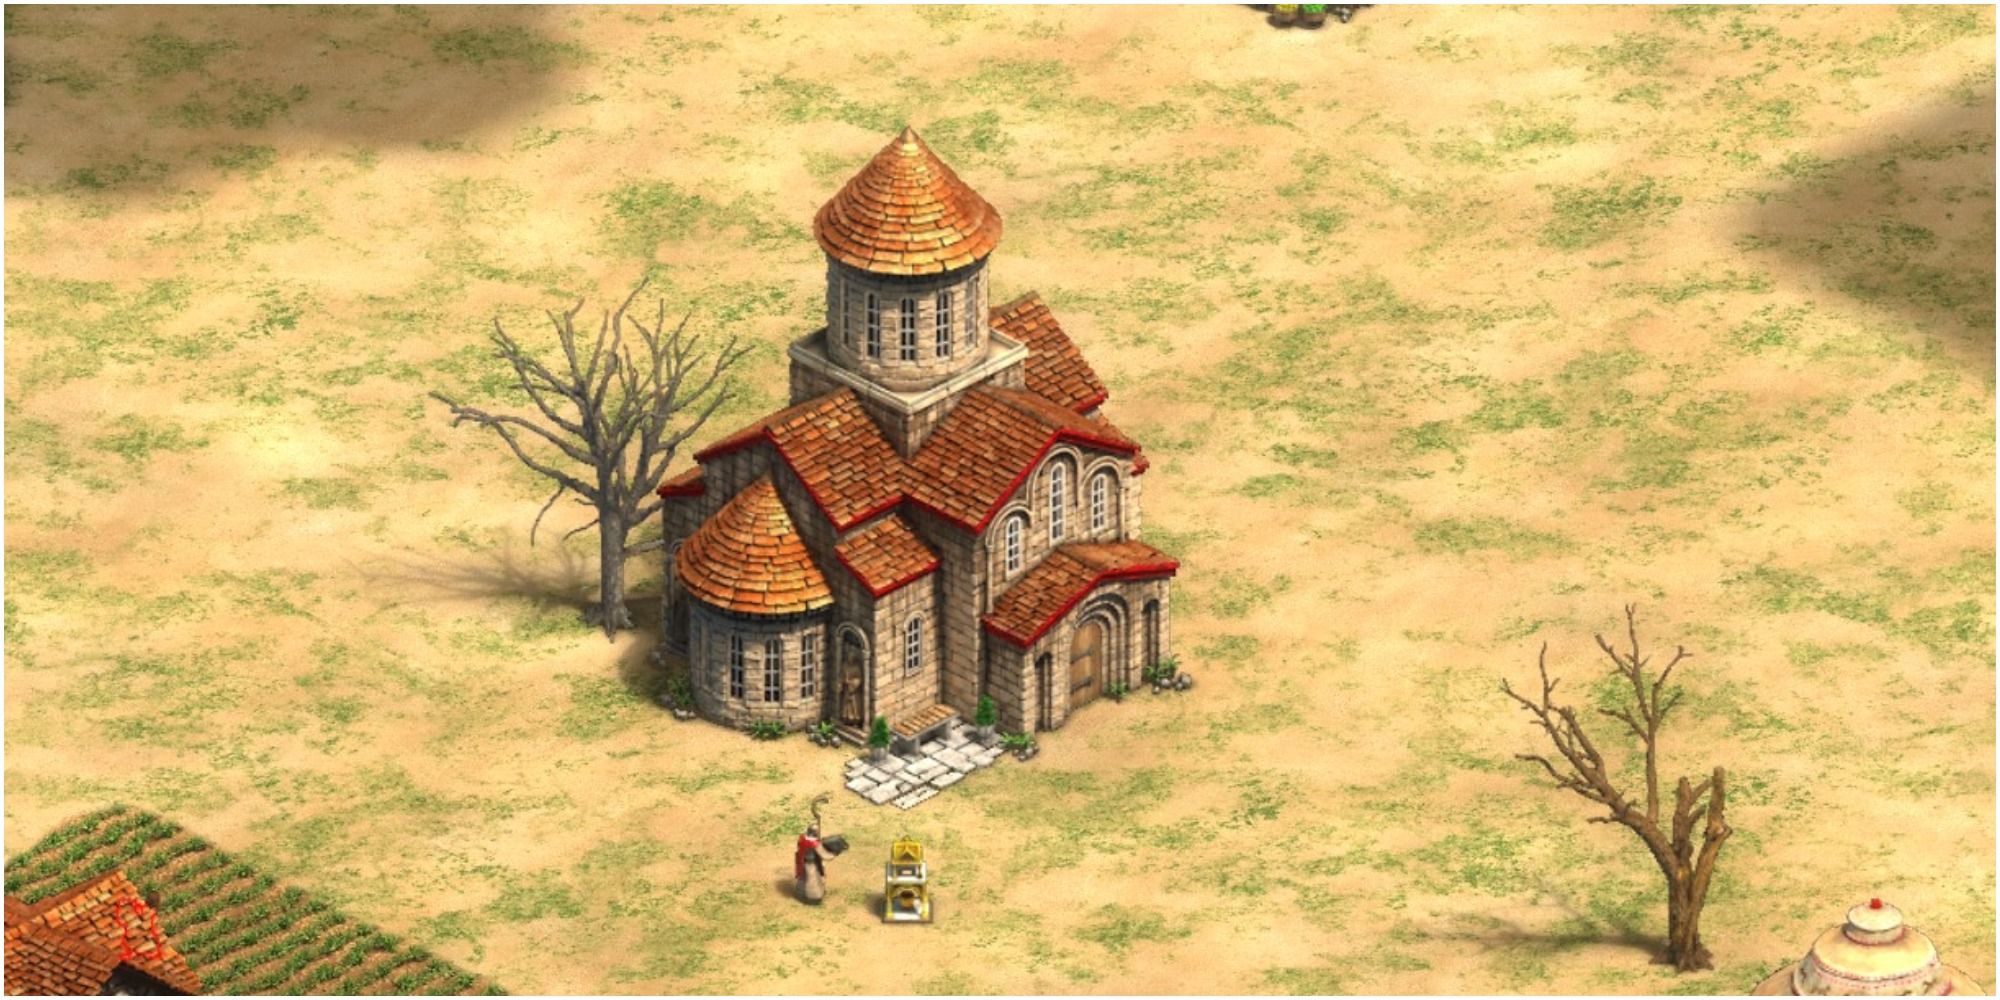 Age of Empires 2 Definitive Edition Monastery, Monk, and Relic